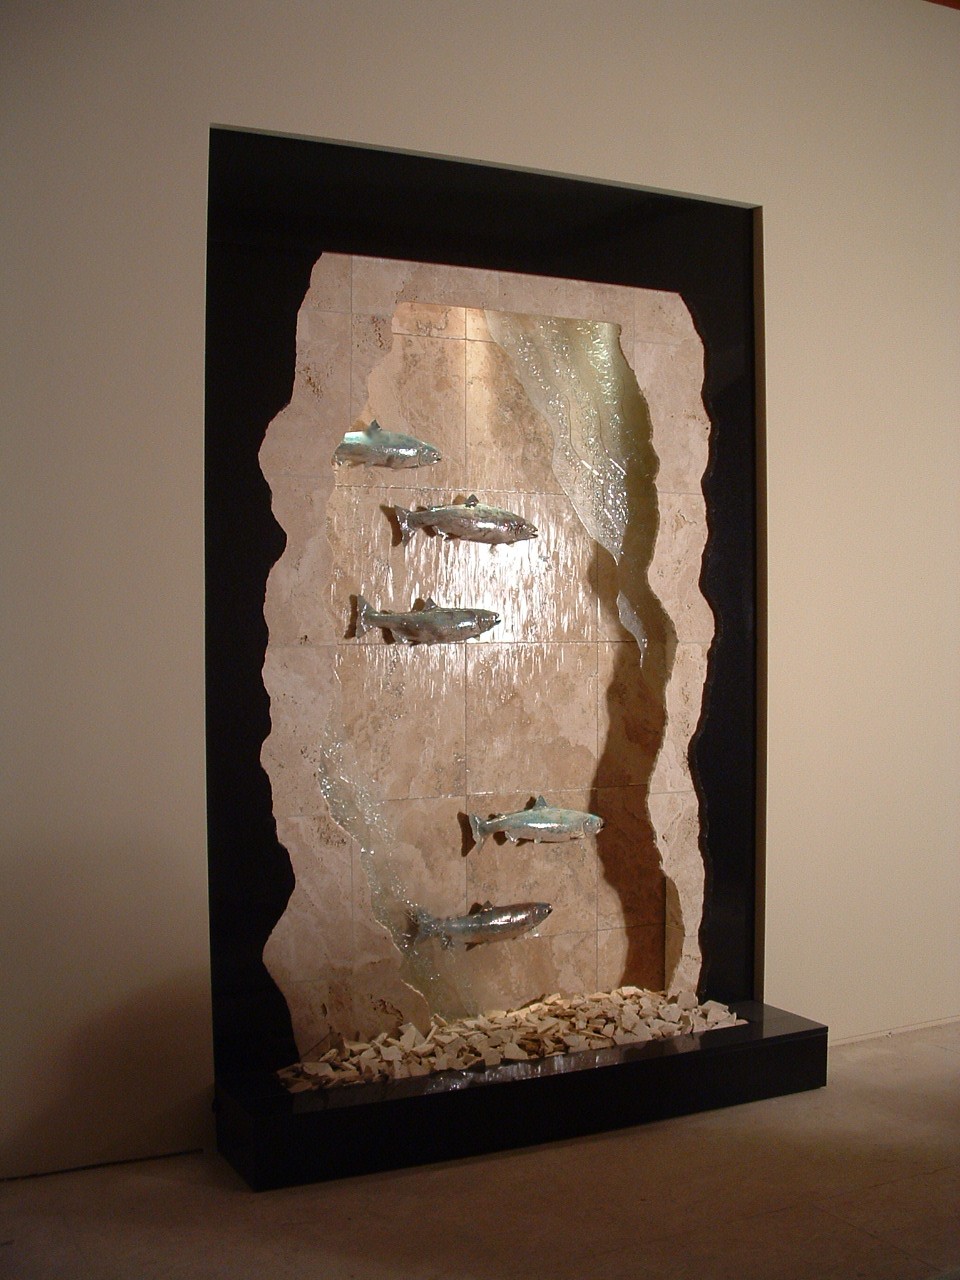 Try City, WA. residence. 7 ft x 10 ft tall travertine backdrop and fractured face with black granite fracture overlaid, fracture art glass in the mix 5 racue glazed salmon, lighting in valance broken travertine in basin, remote pump location. New construction, auto filler.